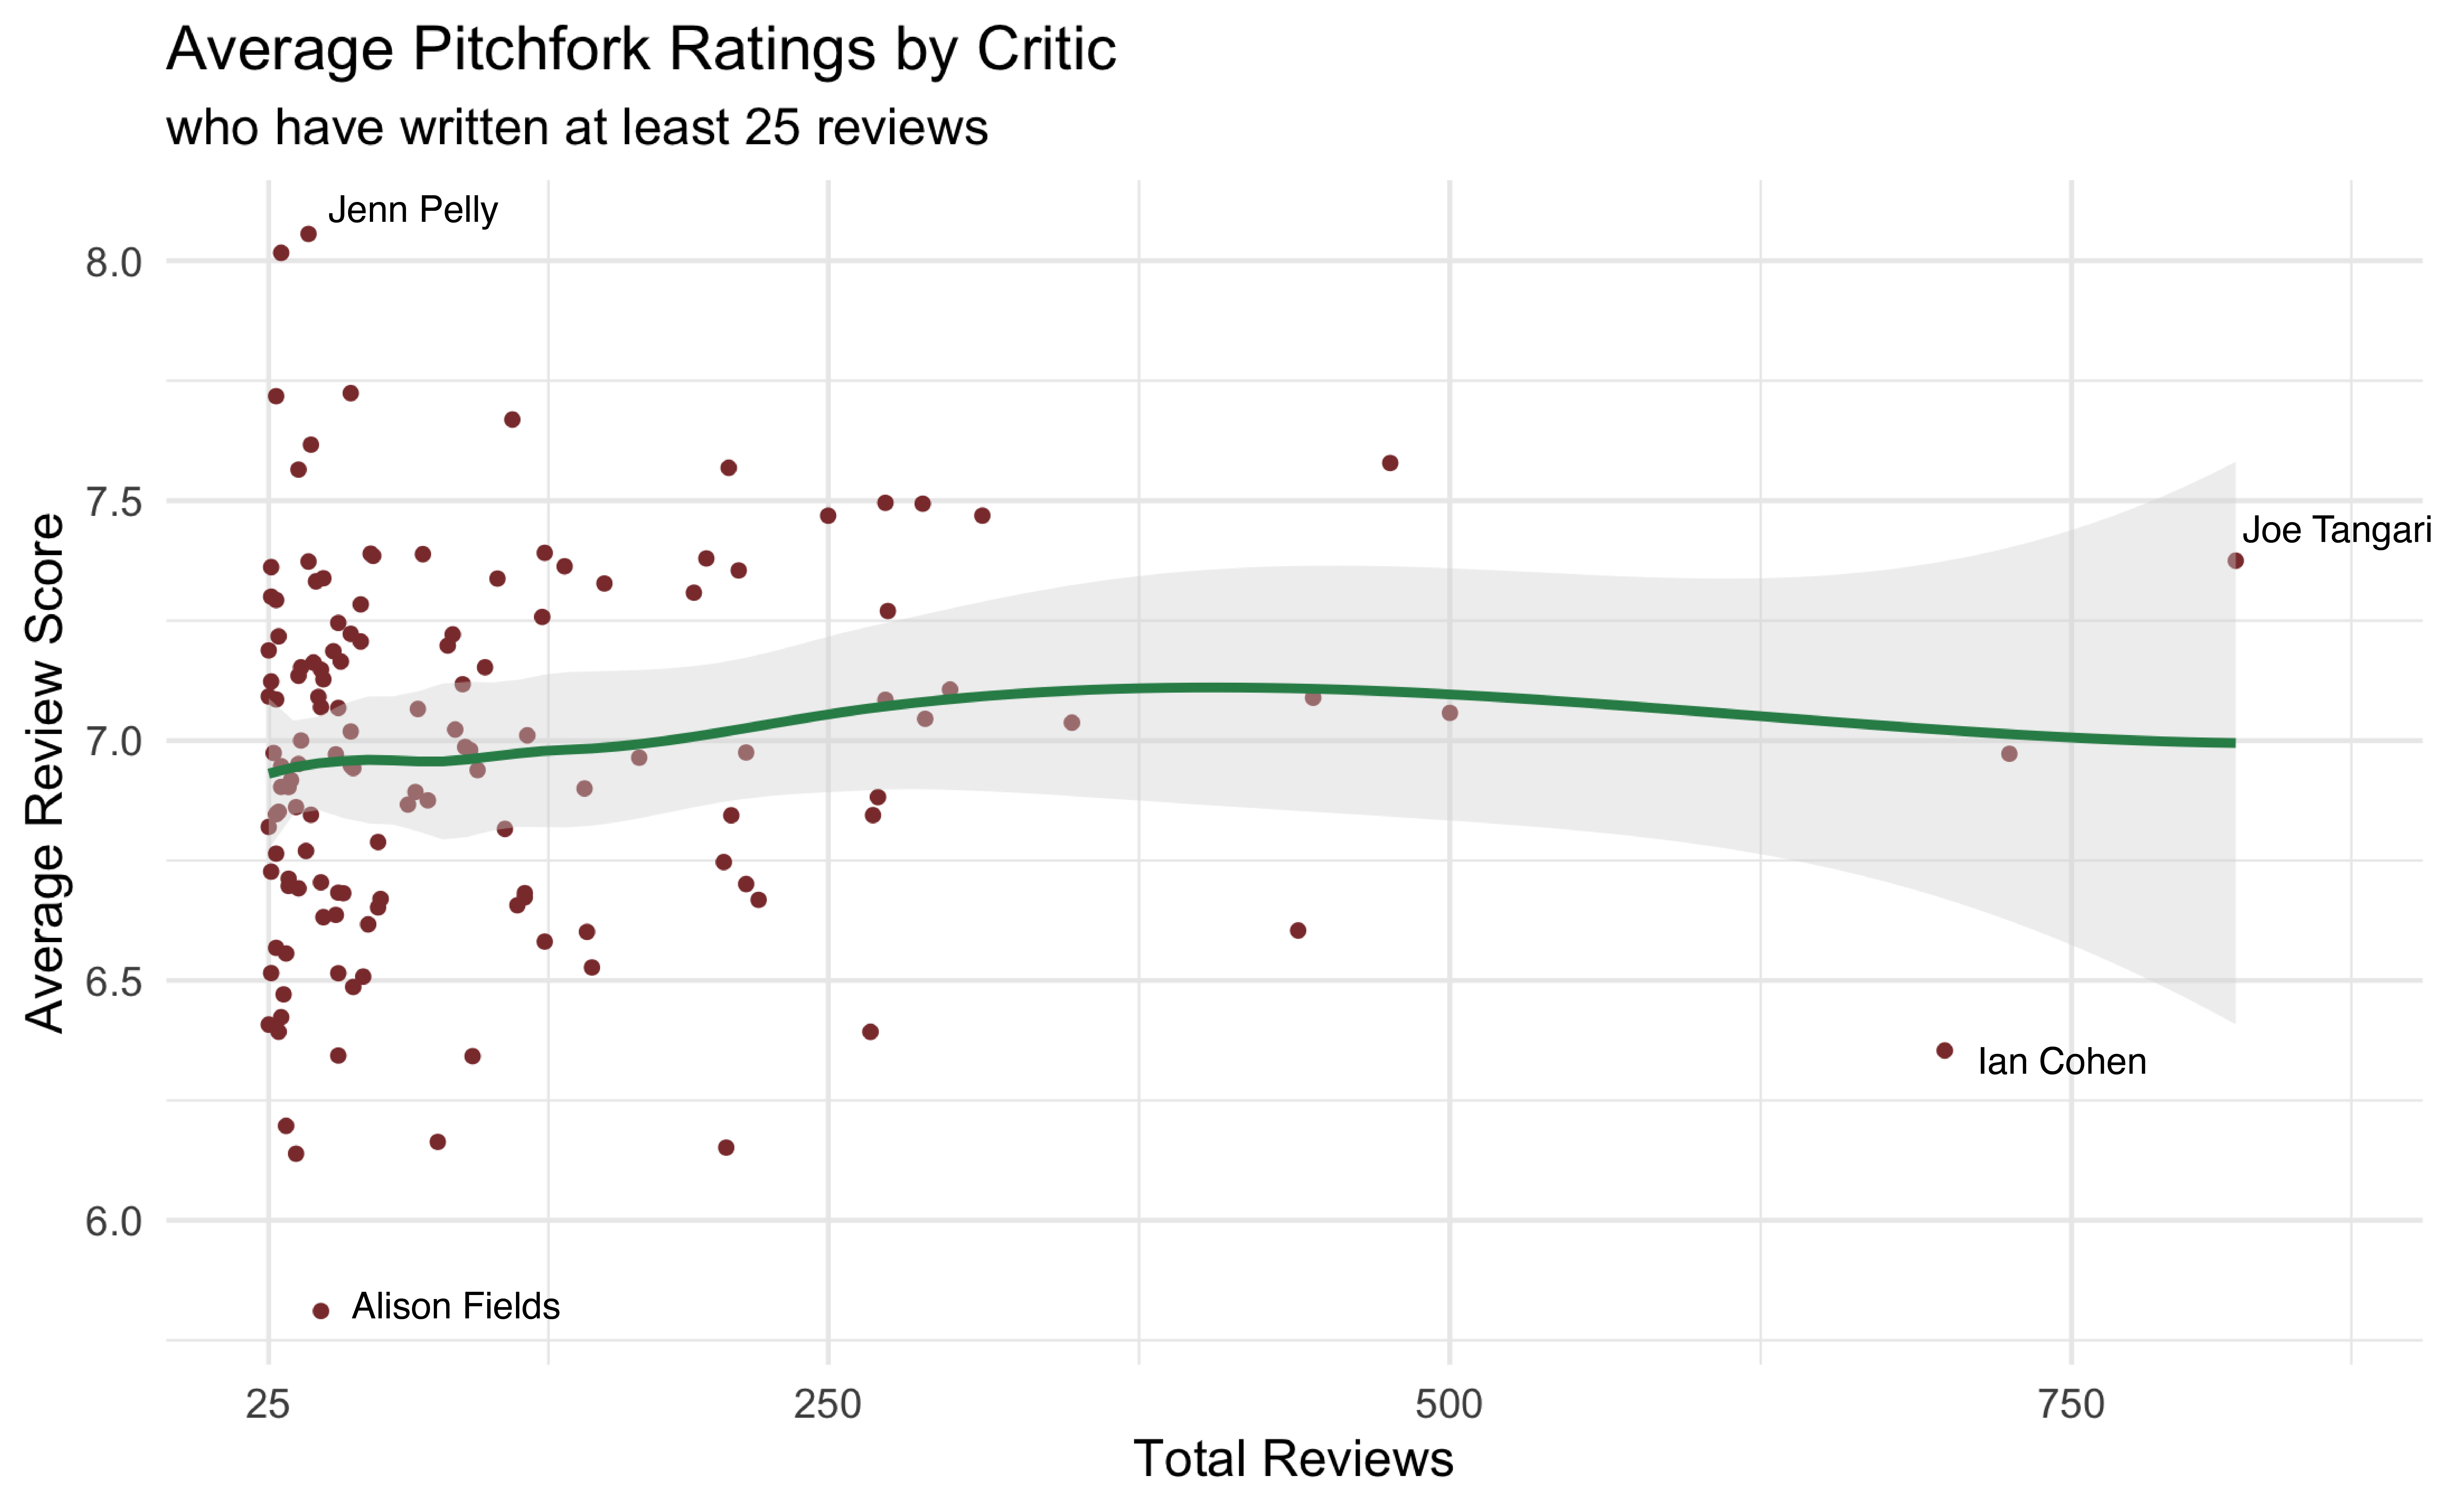 Image shows the 'Average Pitchfork Rating by Critic' visualization, sorted by those who have written at least 25 reviews. Each individual critic is respresented by a dot on a scatter plot, with the x-axis representing the total review count of each critic and the y-axis representing their average overall review score for albums. A line of best fit is utilized to show that the average stays fairly consistent as the number of total reviews increases.